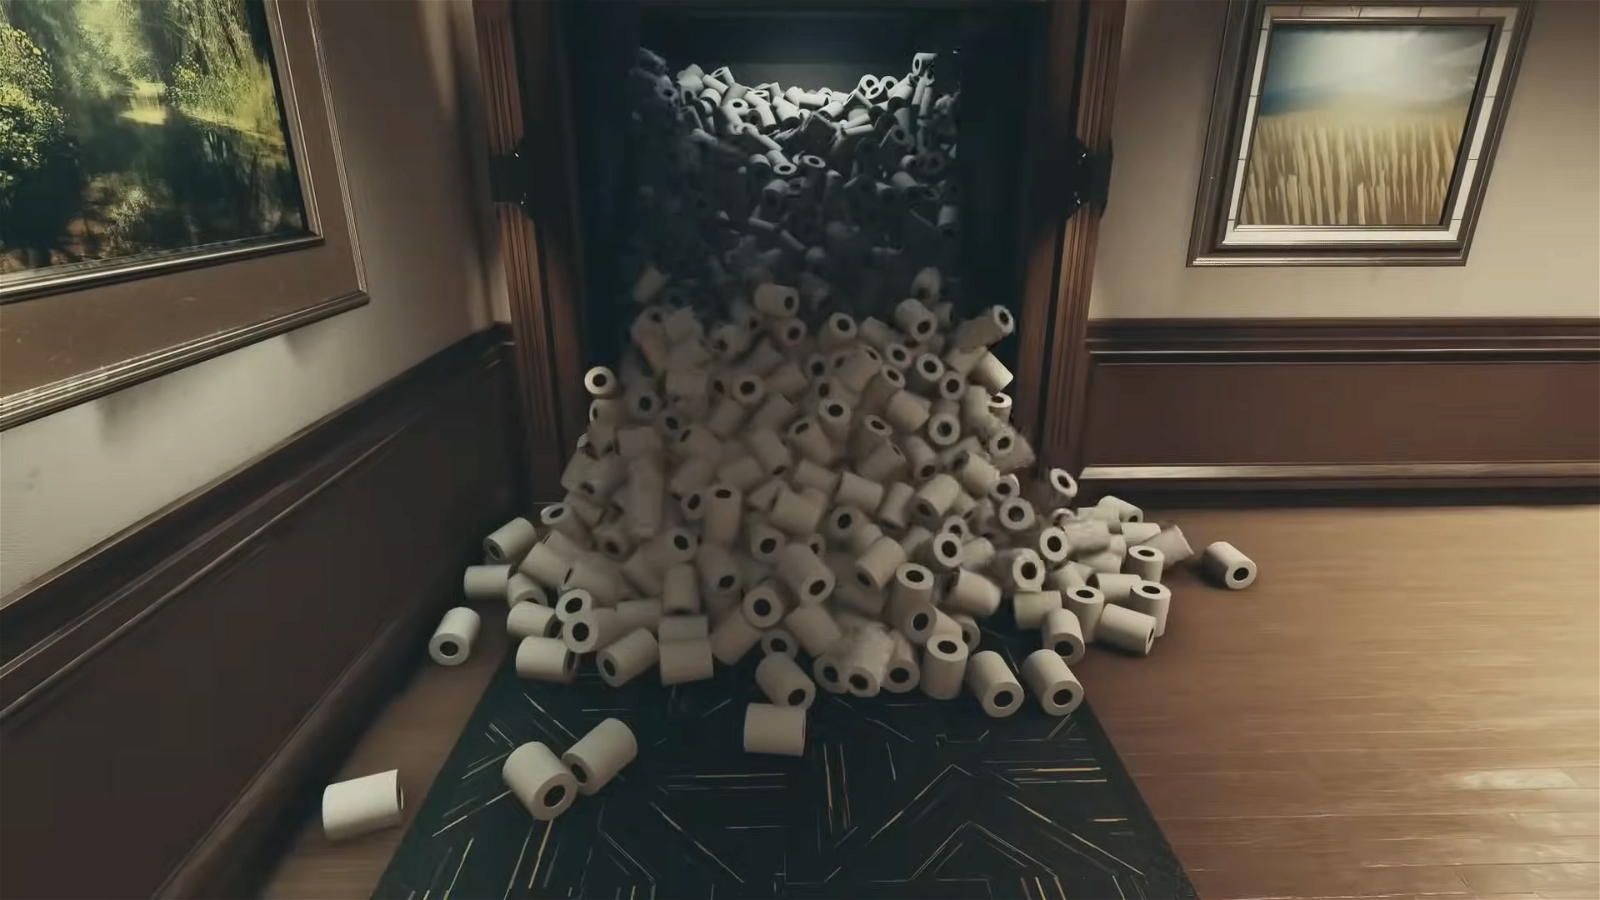 Toilet Paper Rolls spawned in Starfield